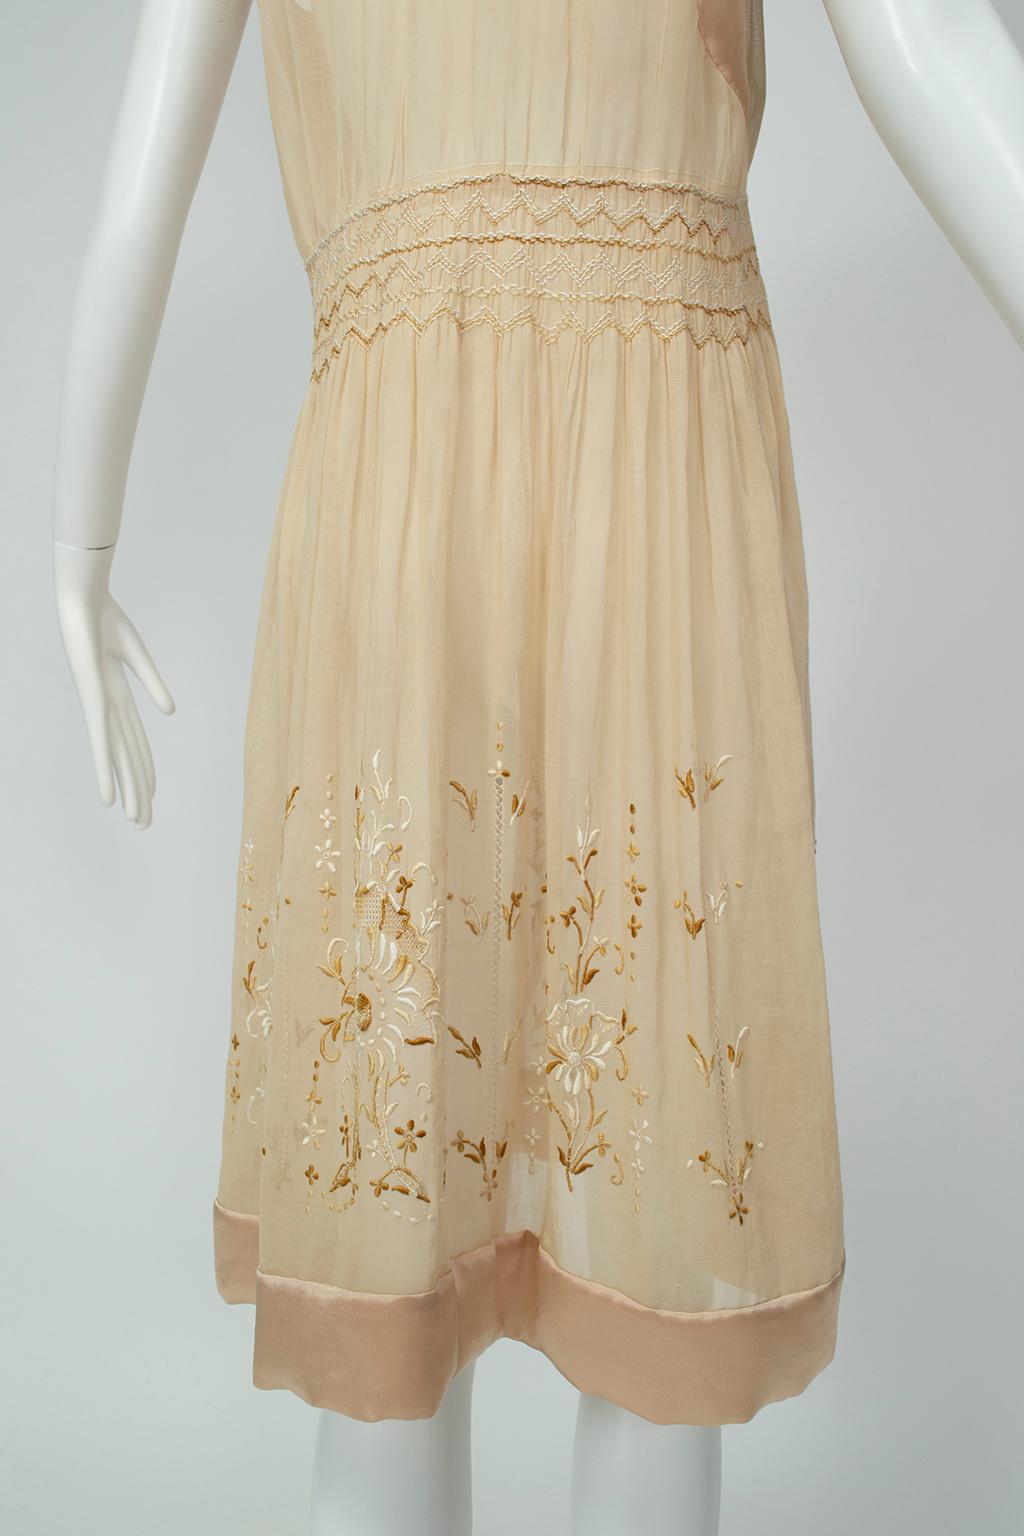 Edwardian Nude Sheer Embroidered Voile and Satin Chemise Dress - M, 1910s 5